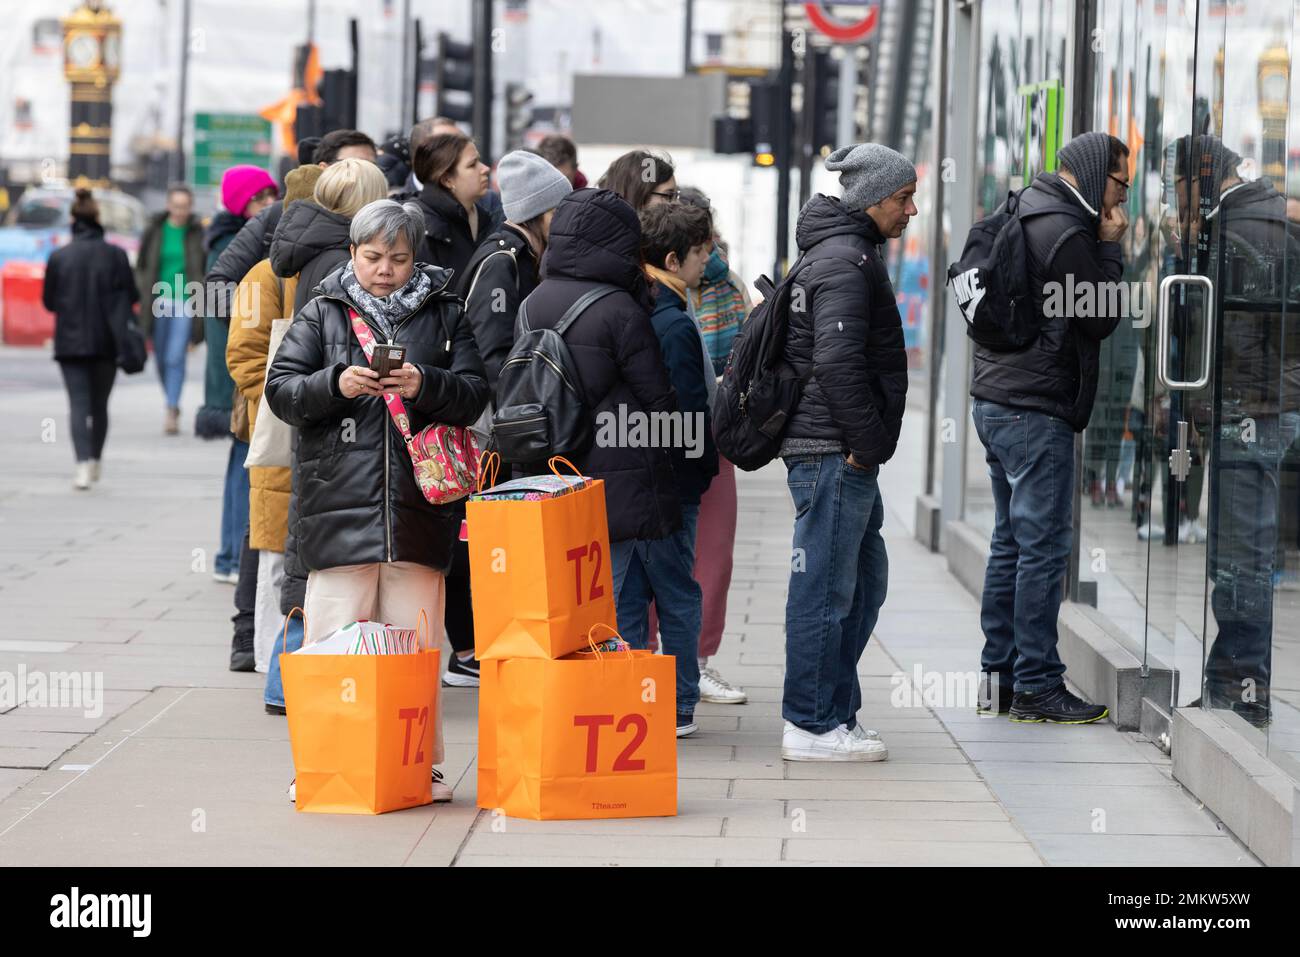 Shoppers queuing for bargains outside at T2's closing-down sale in Victoria, London as the brand has slashed prices by 80% due to the retail climate. Stock Photo